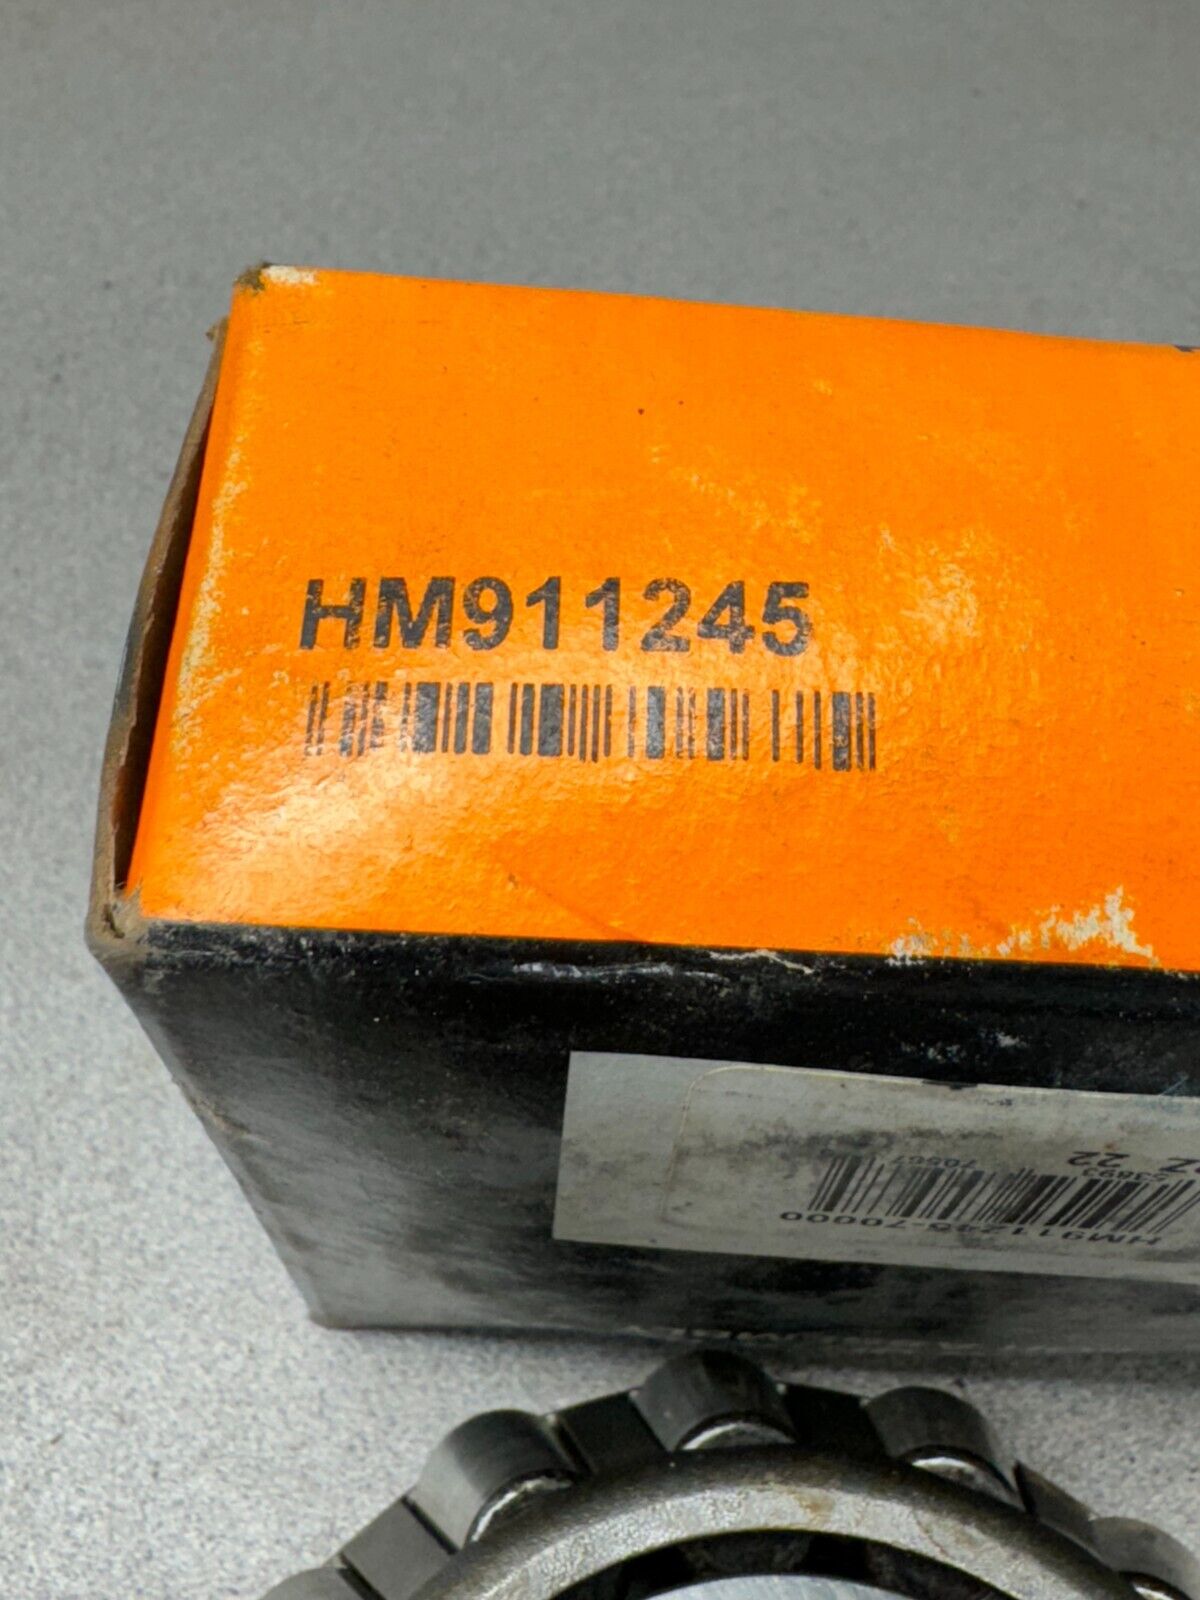 NEW IN BOX TIMKEN TAPERED ROLLER BEARING HM911245